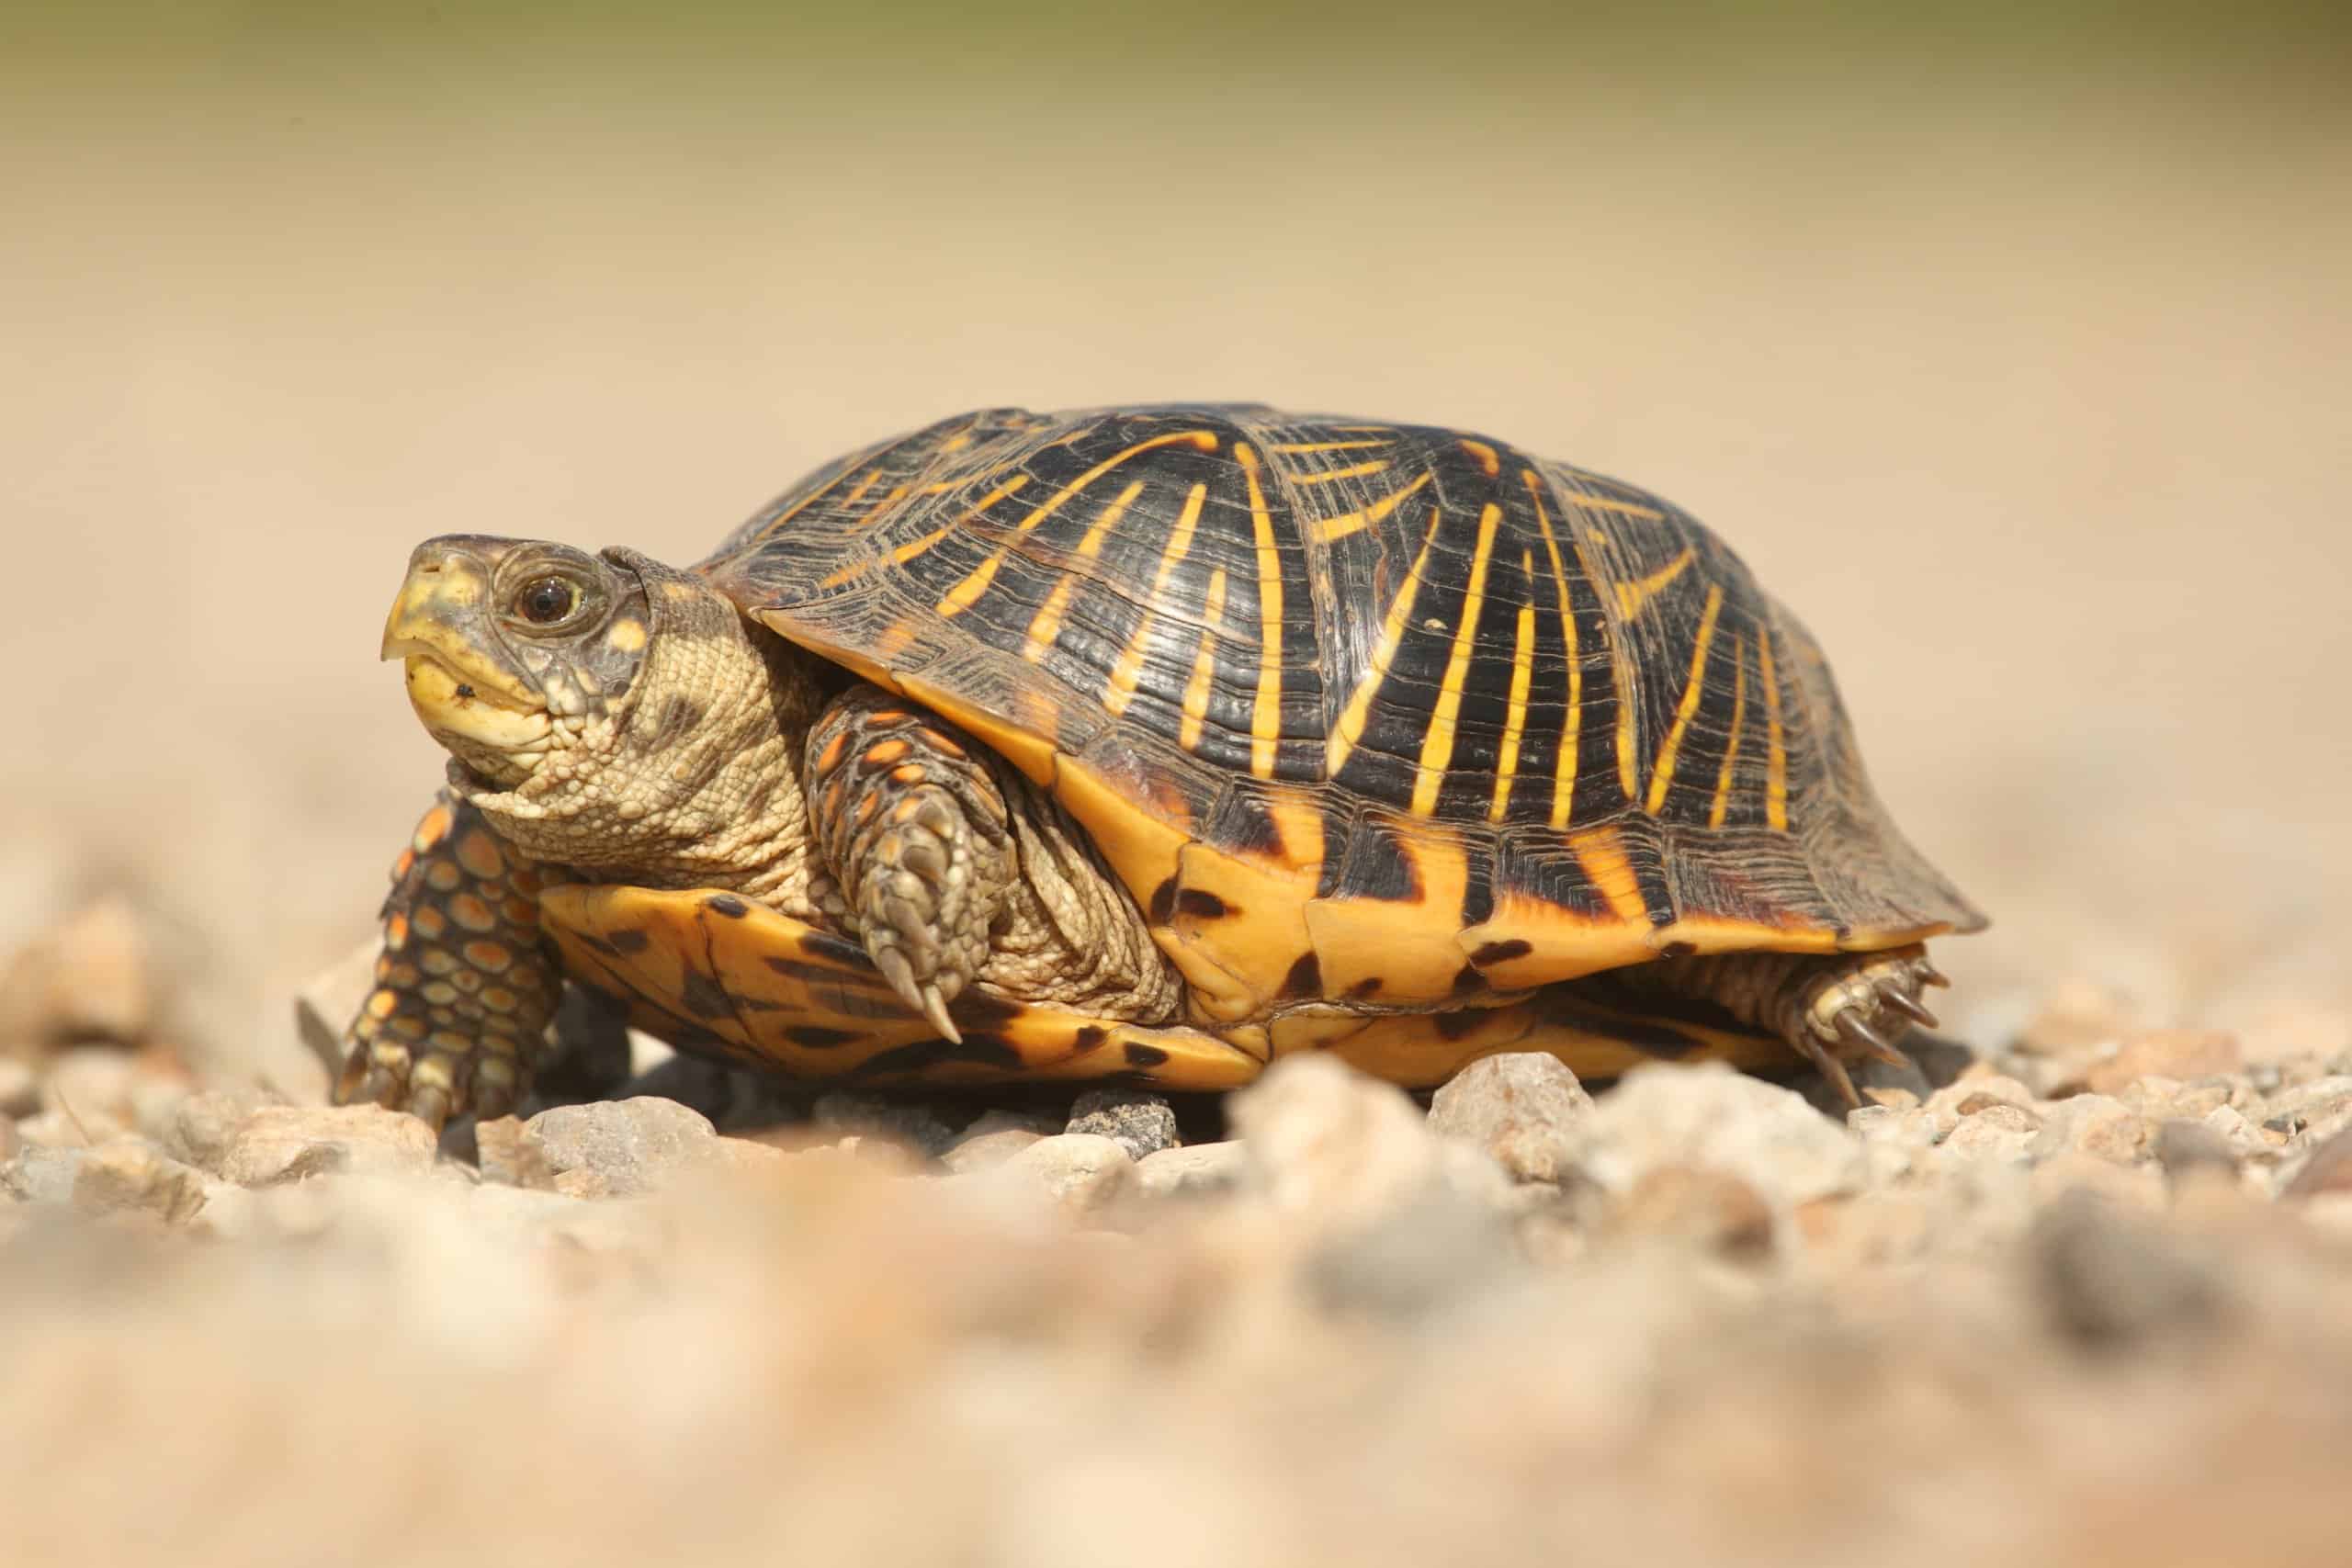 Ornate box turtles are a subspecies of the western box turtle